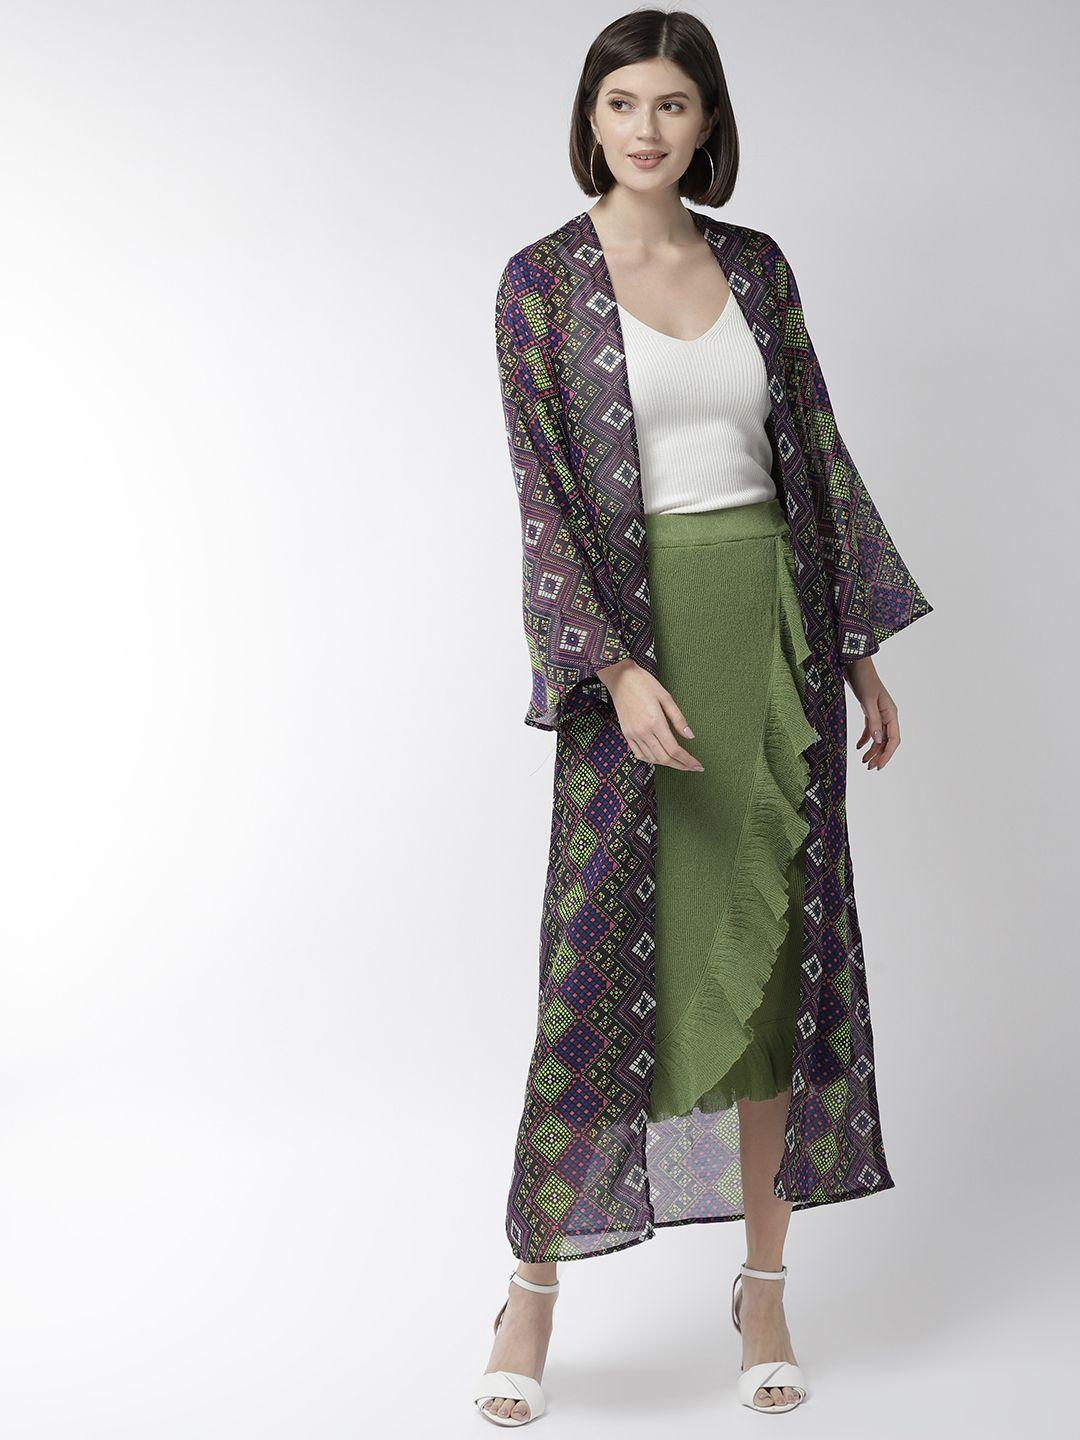 style-quotient-women-blue-&-green-printed-open-front-shrug